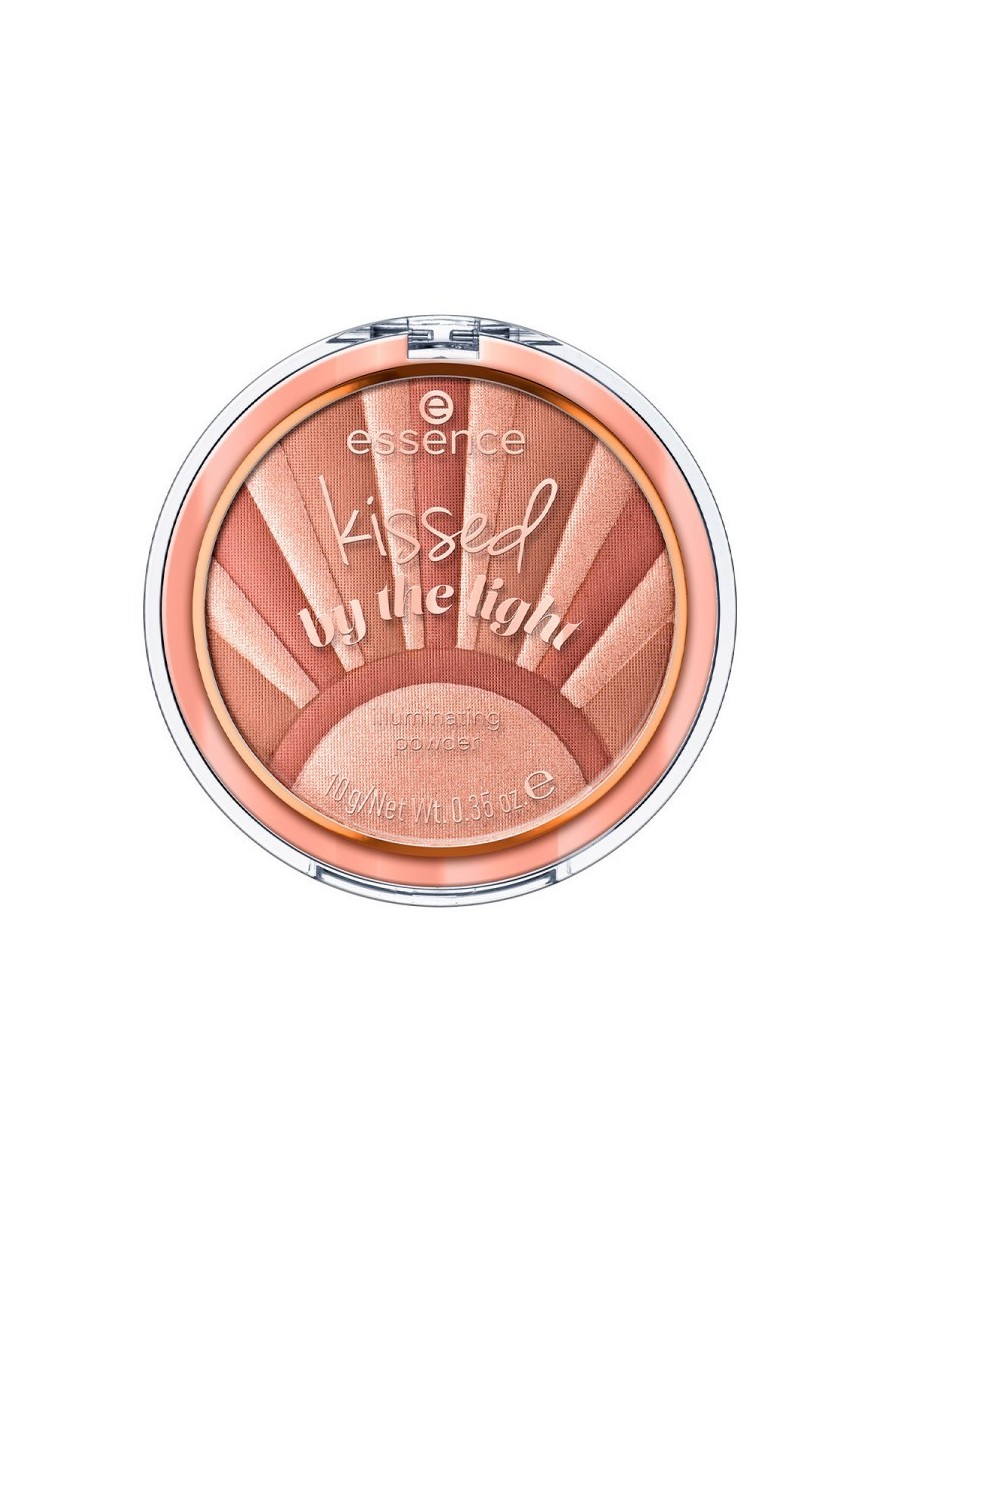 Essence Cosmetics Kissed By The Light Polvos Iluminadores 02-Sun Kissed 10g